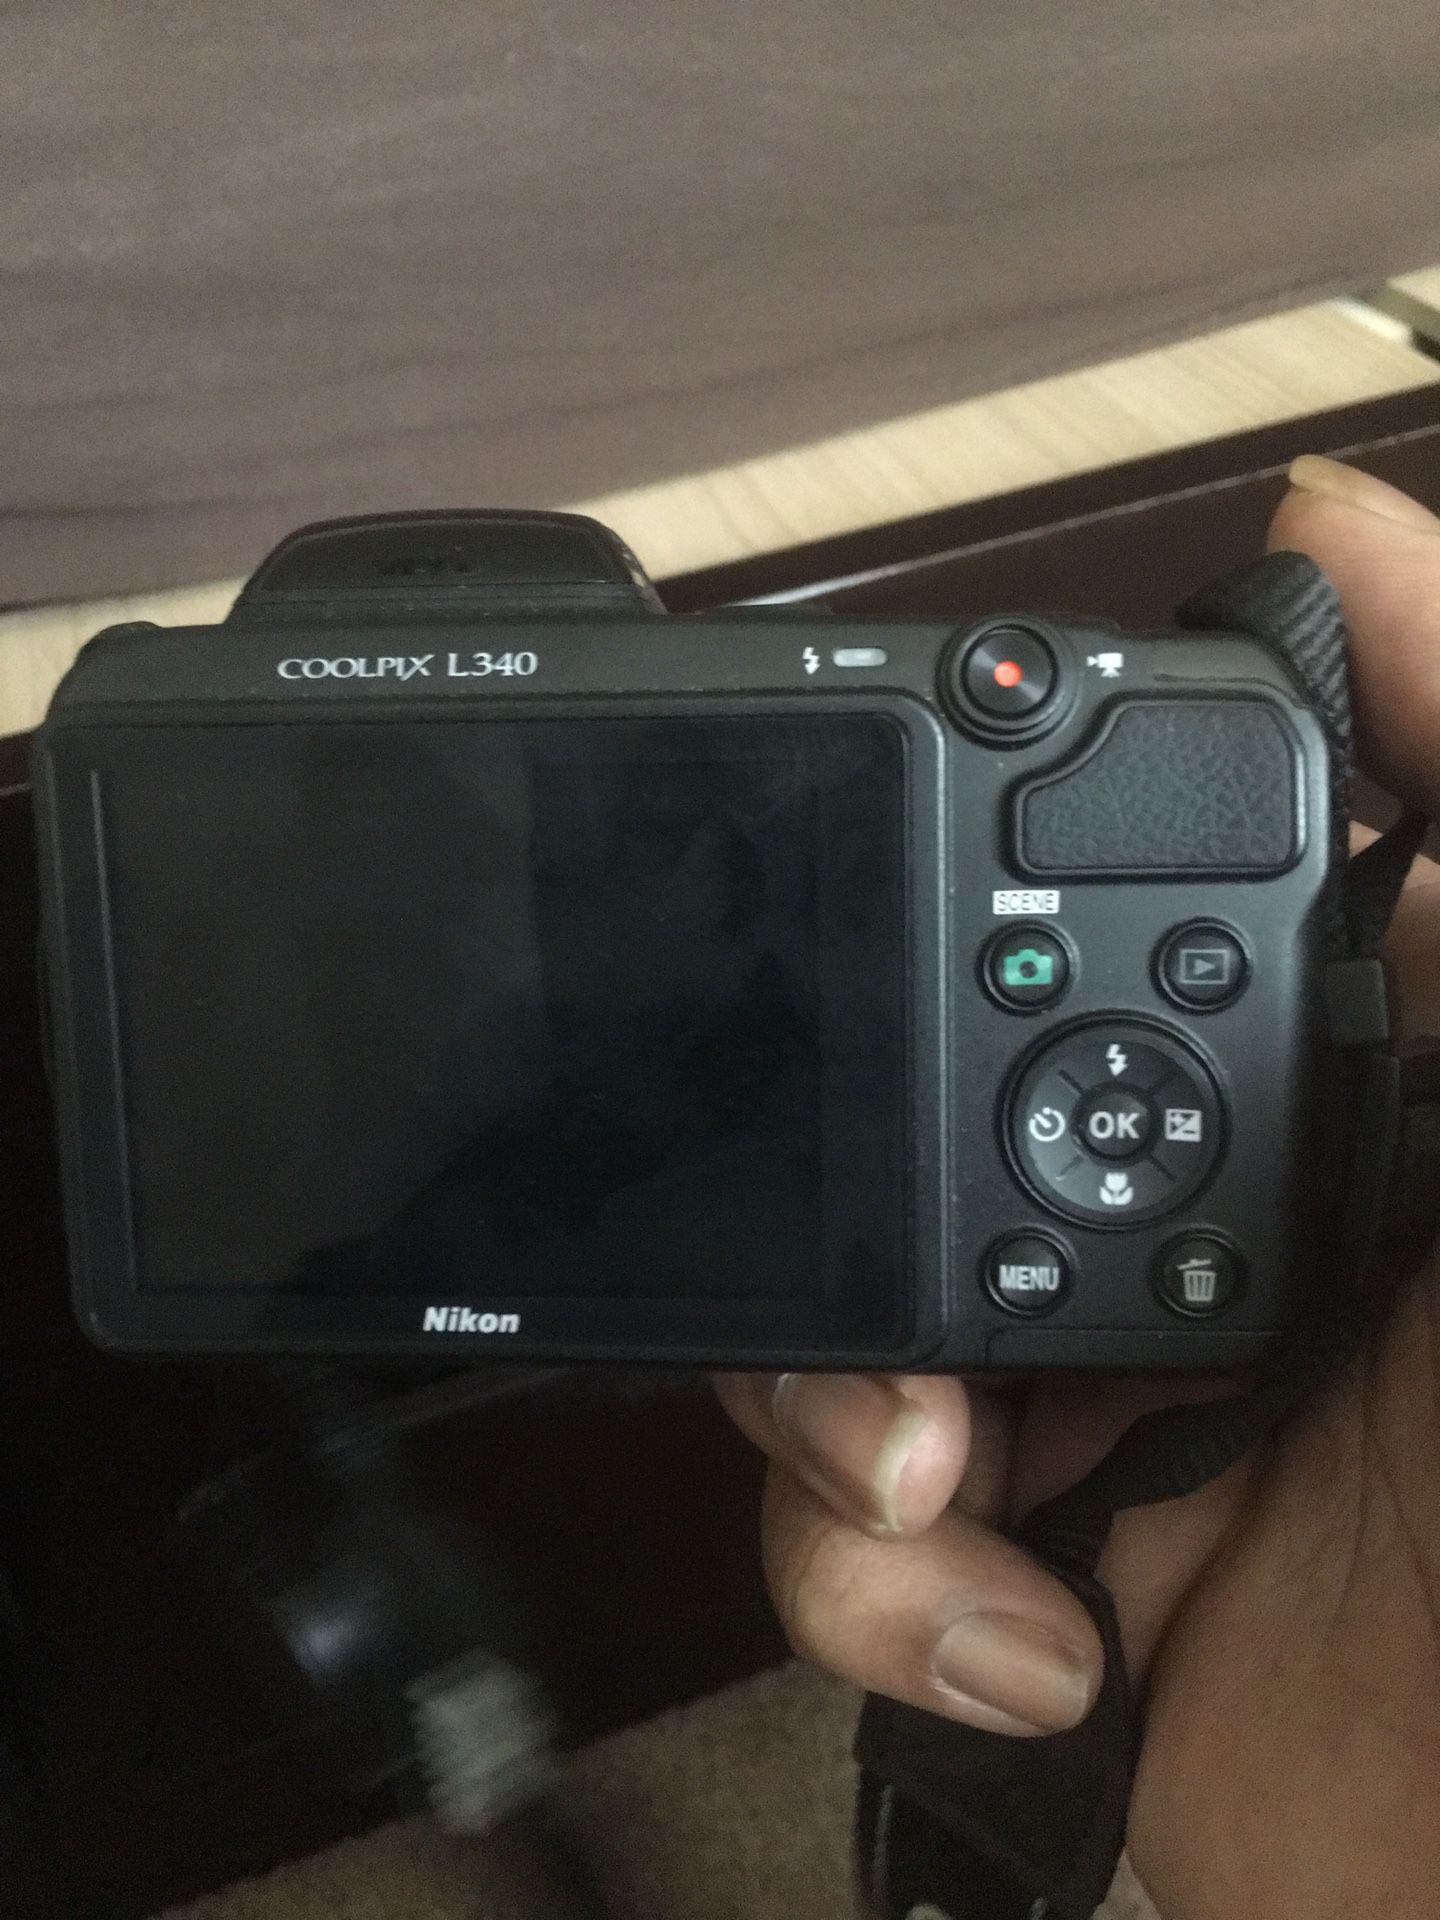 Nikon coolpix L340 everything works never dropped or scratched comes with bag